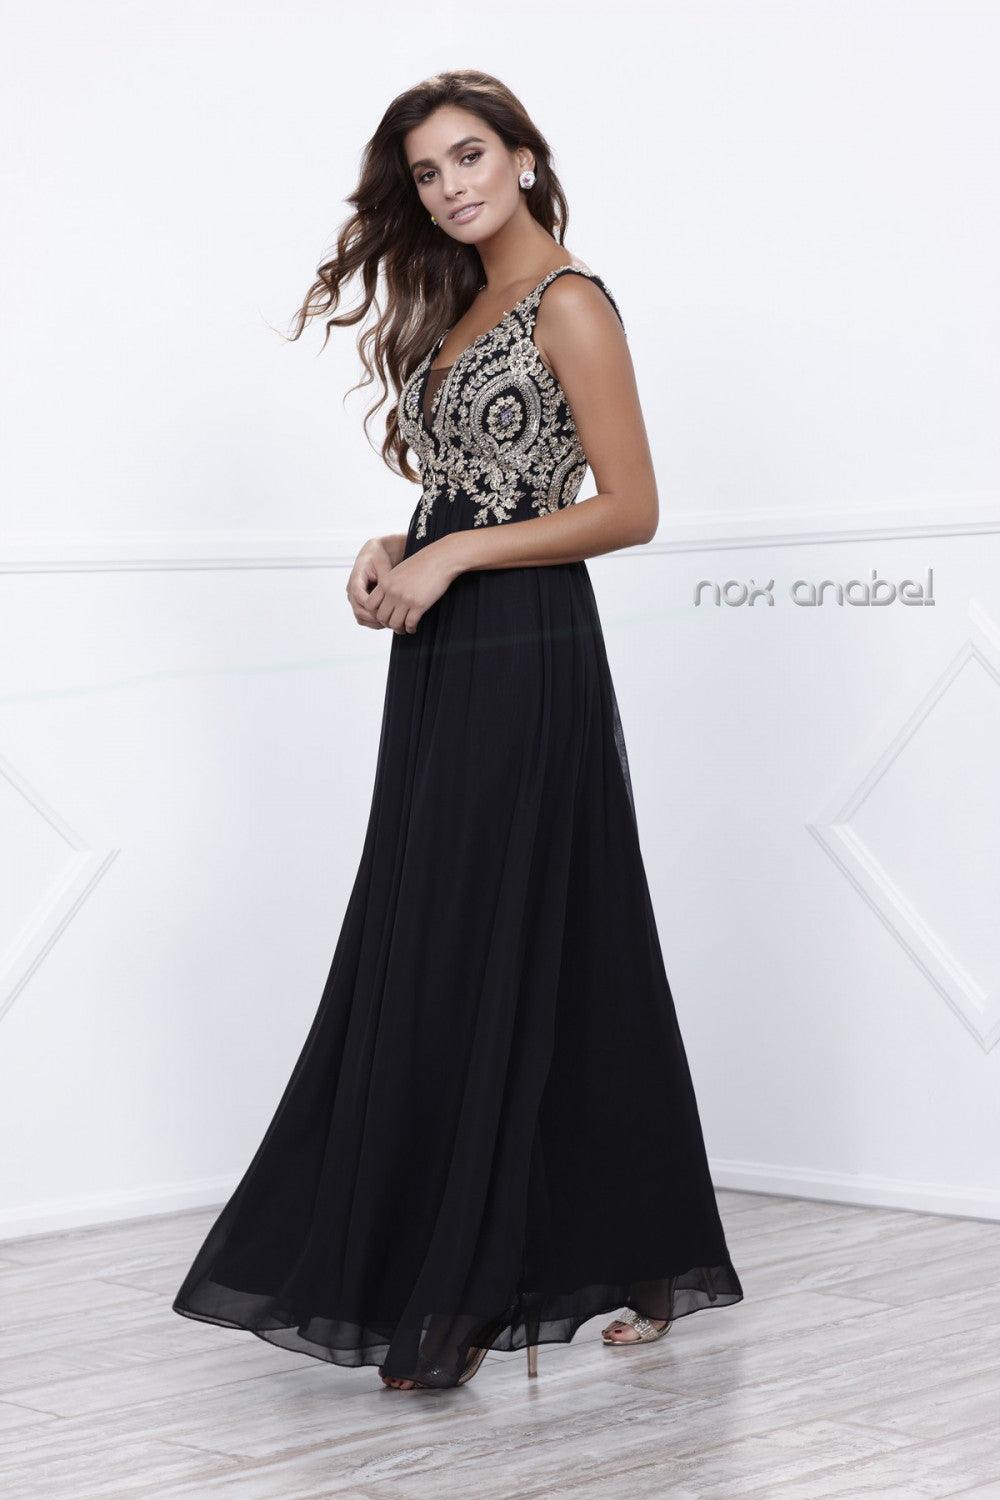 Long Prom Dress Evening Gown - The Dress Outlet Nox Anabel